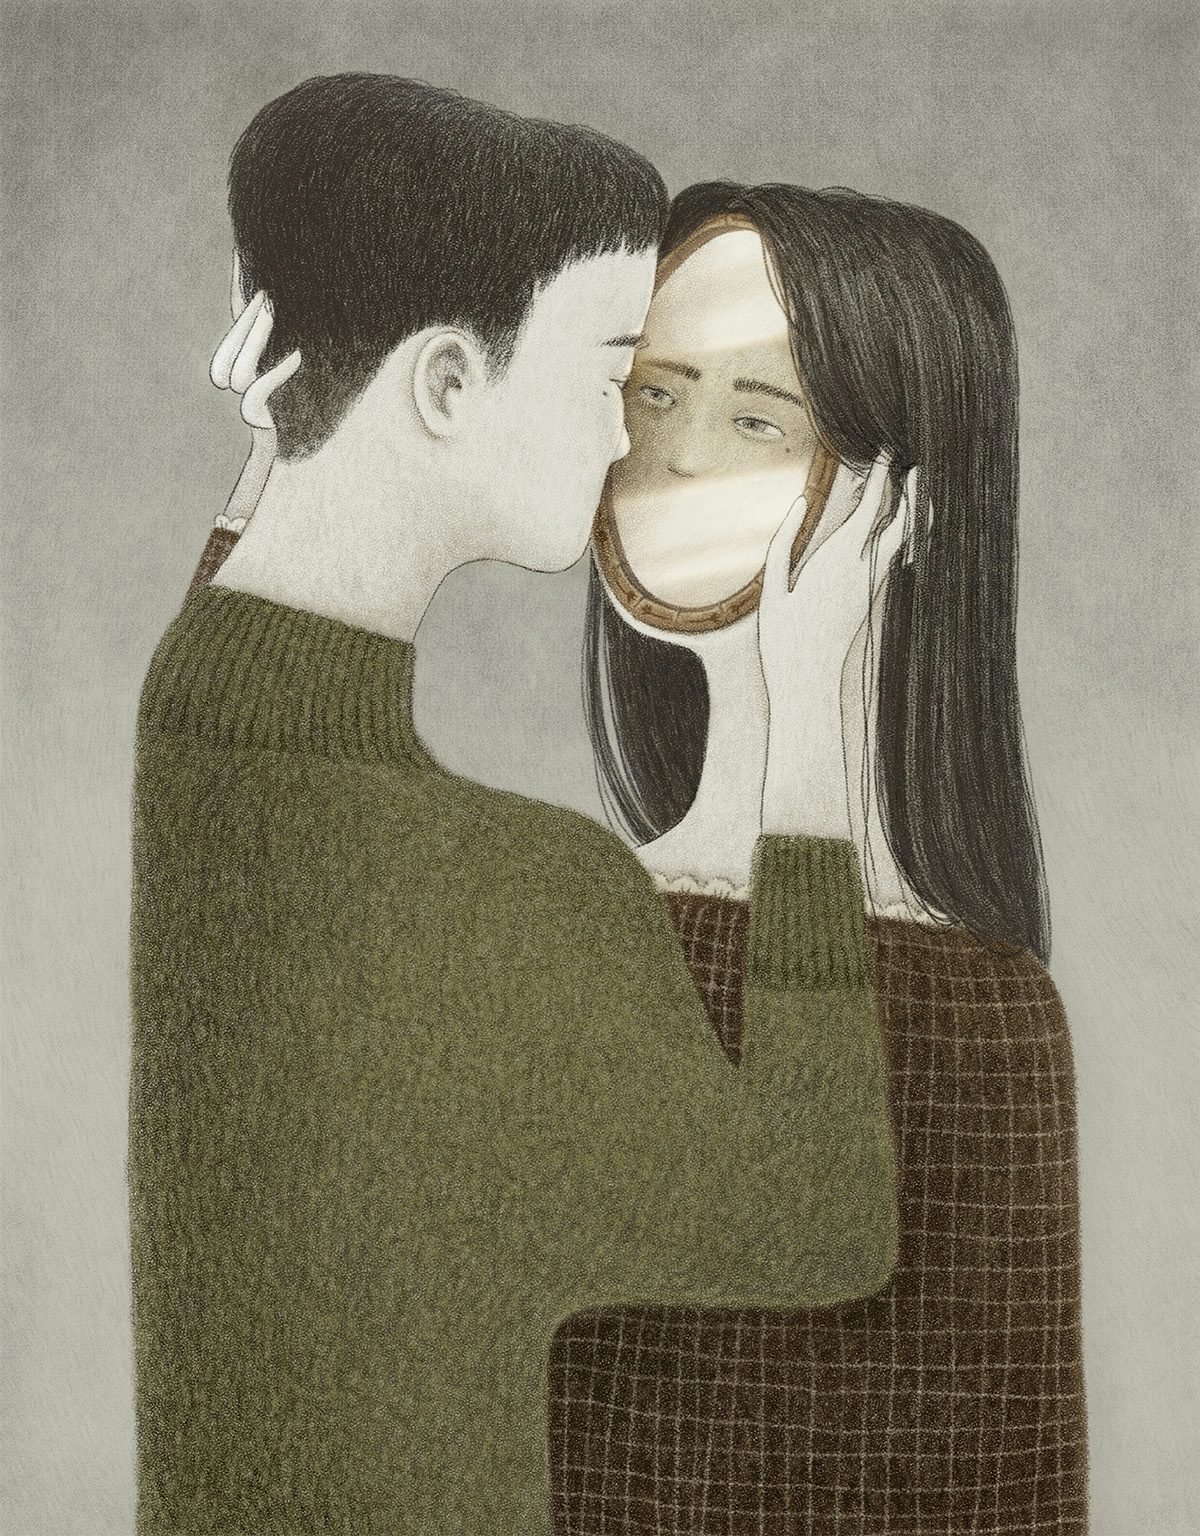 Illustration of one person looking into the eyes of another person, whose face is a mirror